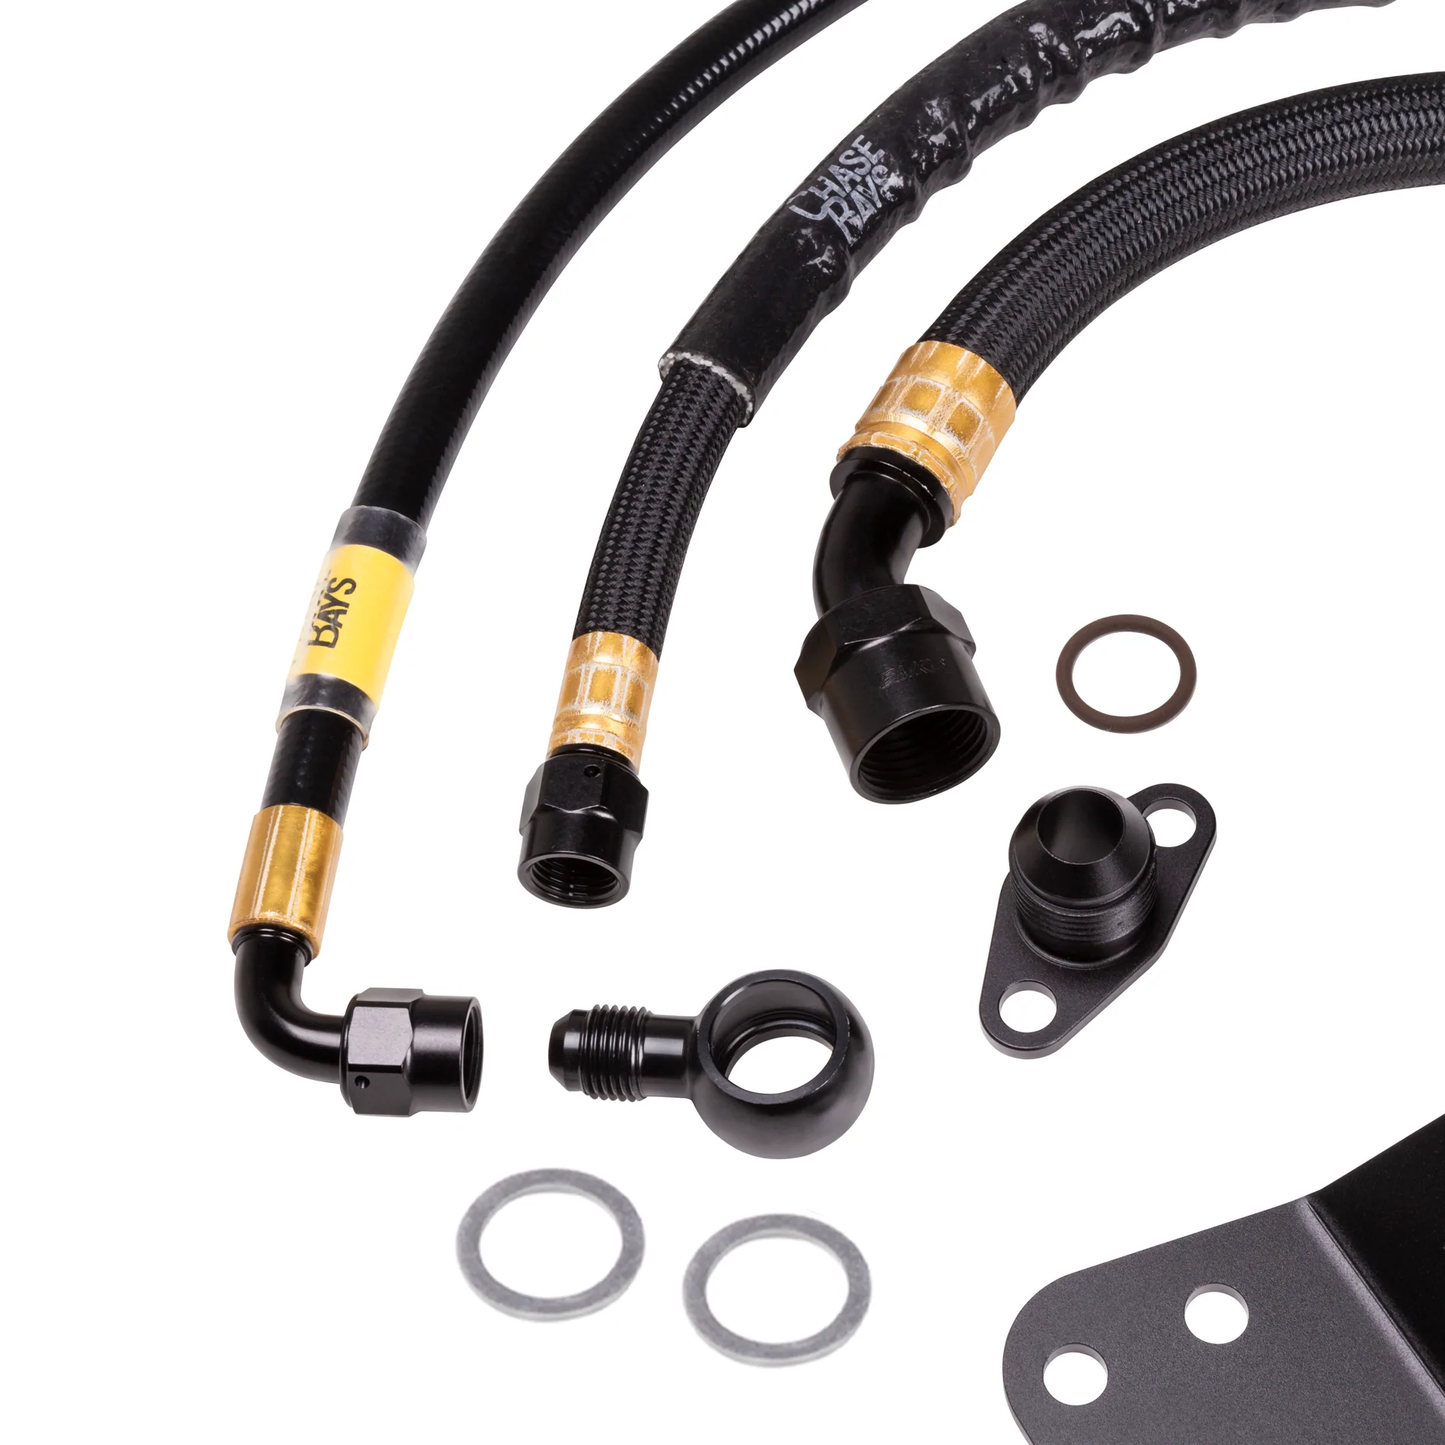 Chase Bays - Power Steering Kit - Nissan 240sx S13 / S14 / S15 with KA24DE (CB-N-PSK4)